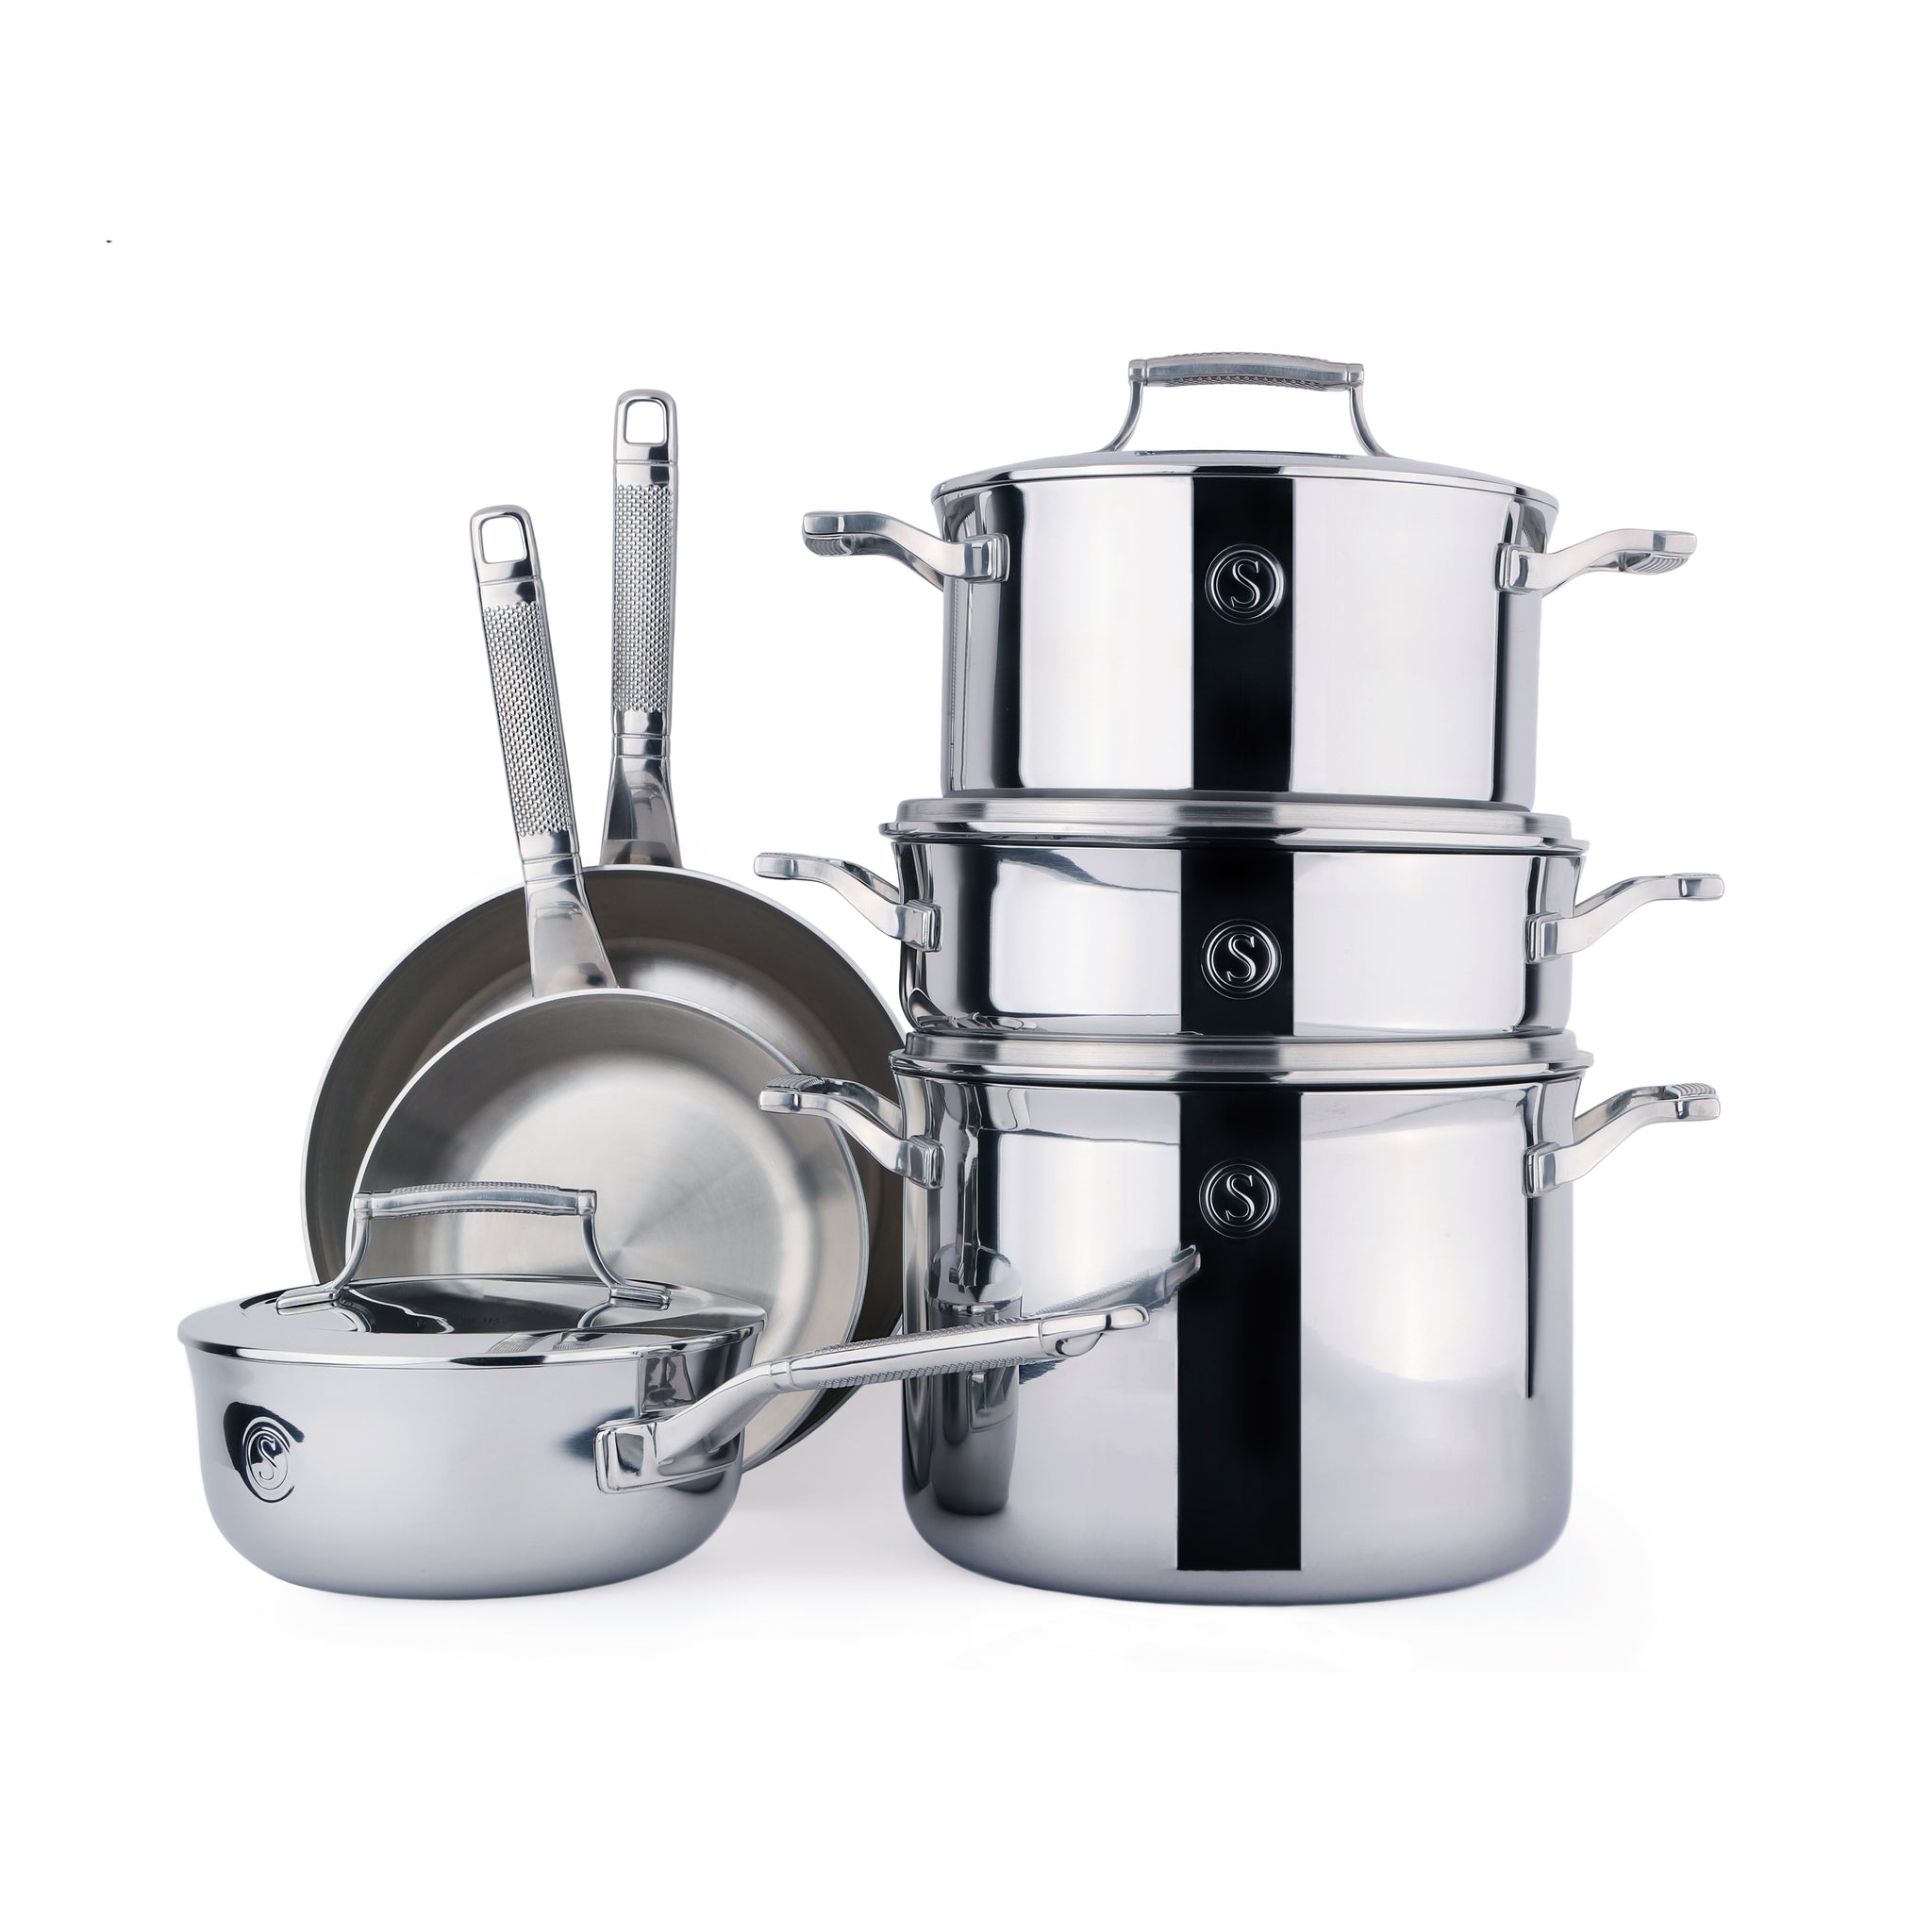 Stainless Steel Tri-Ply 10 Piece Cookware Set - 20cm, 22cm & 25cm